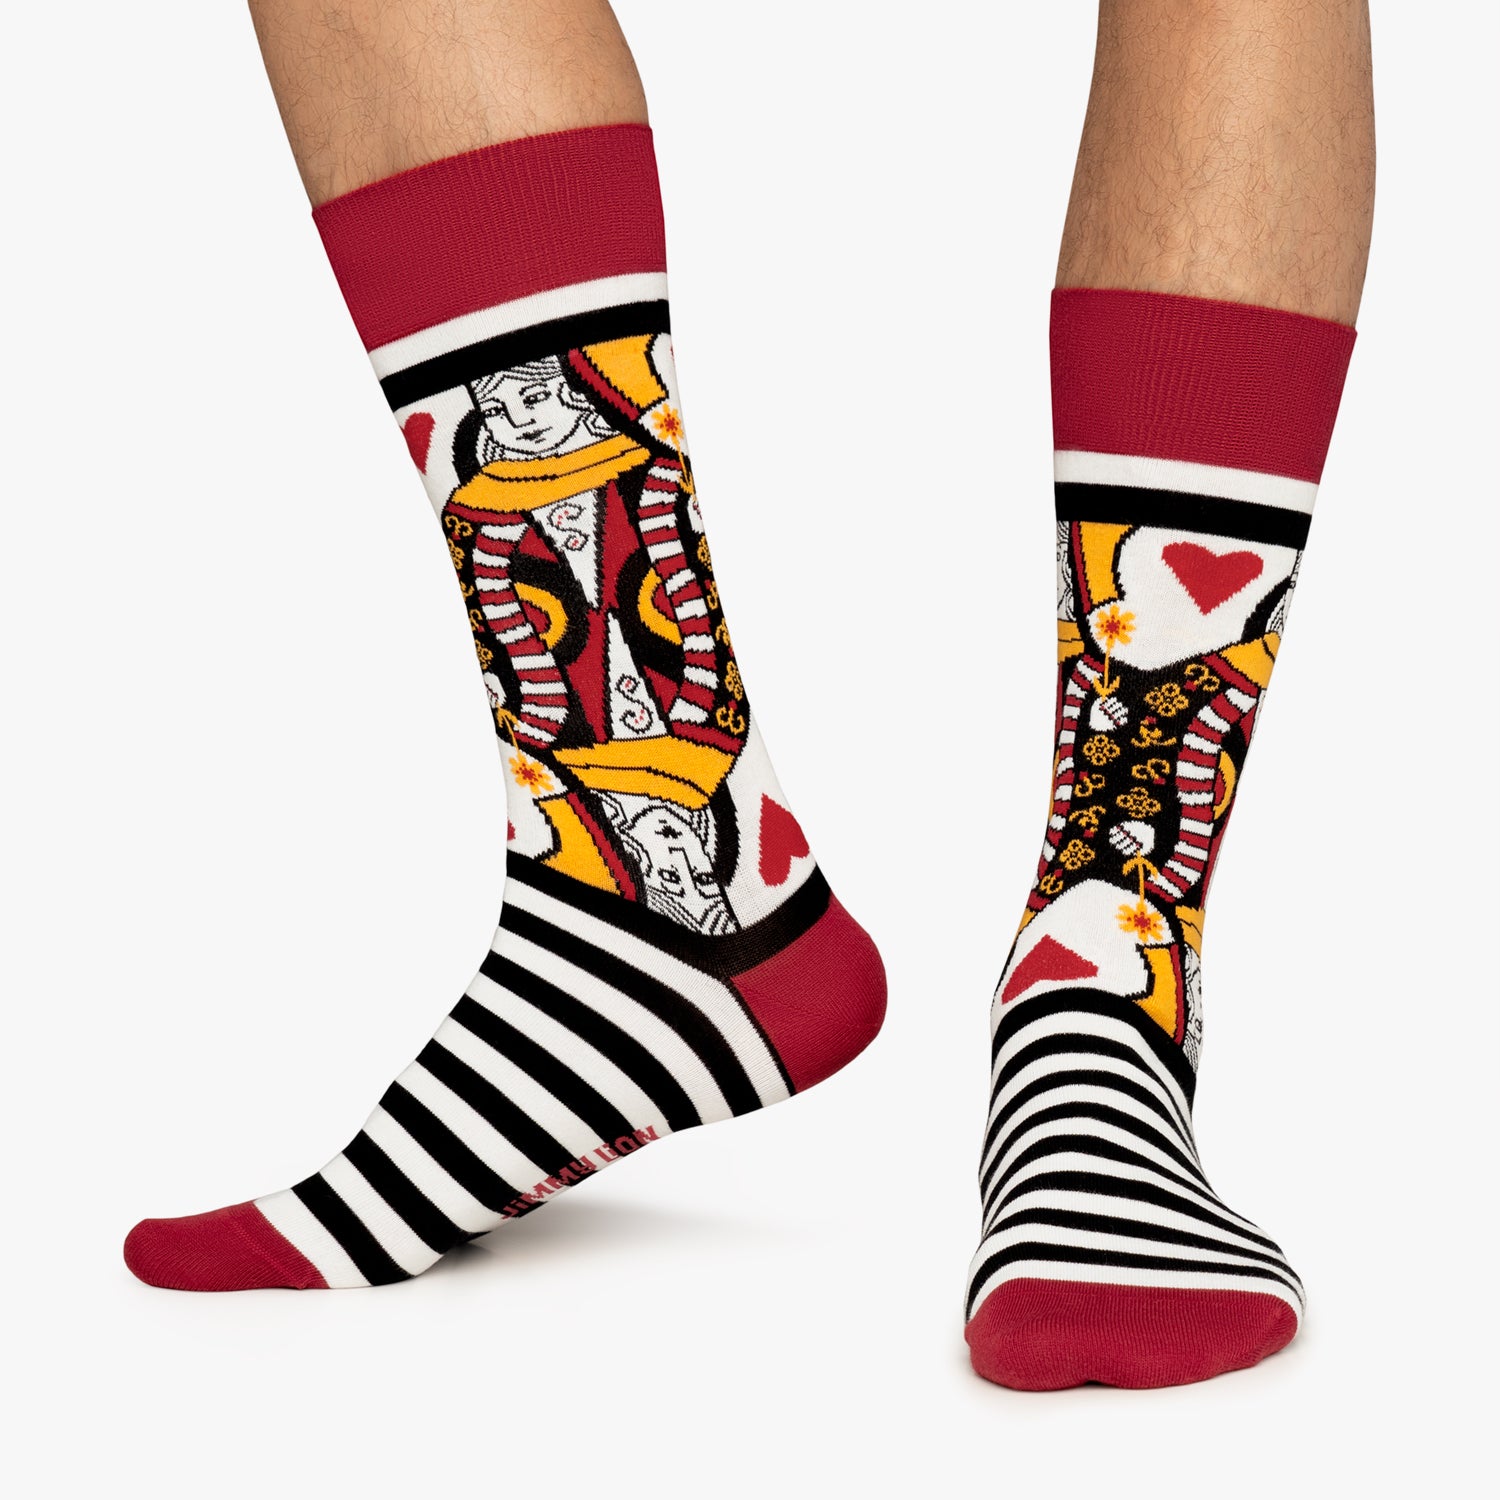 Jimmy Lion - With so many options, choosing the right sock